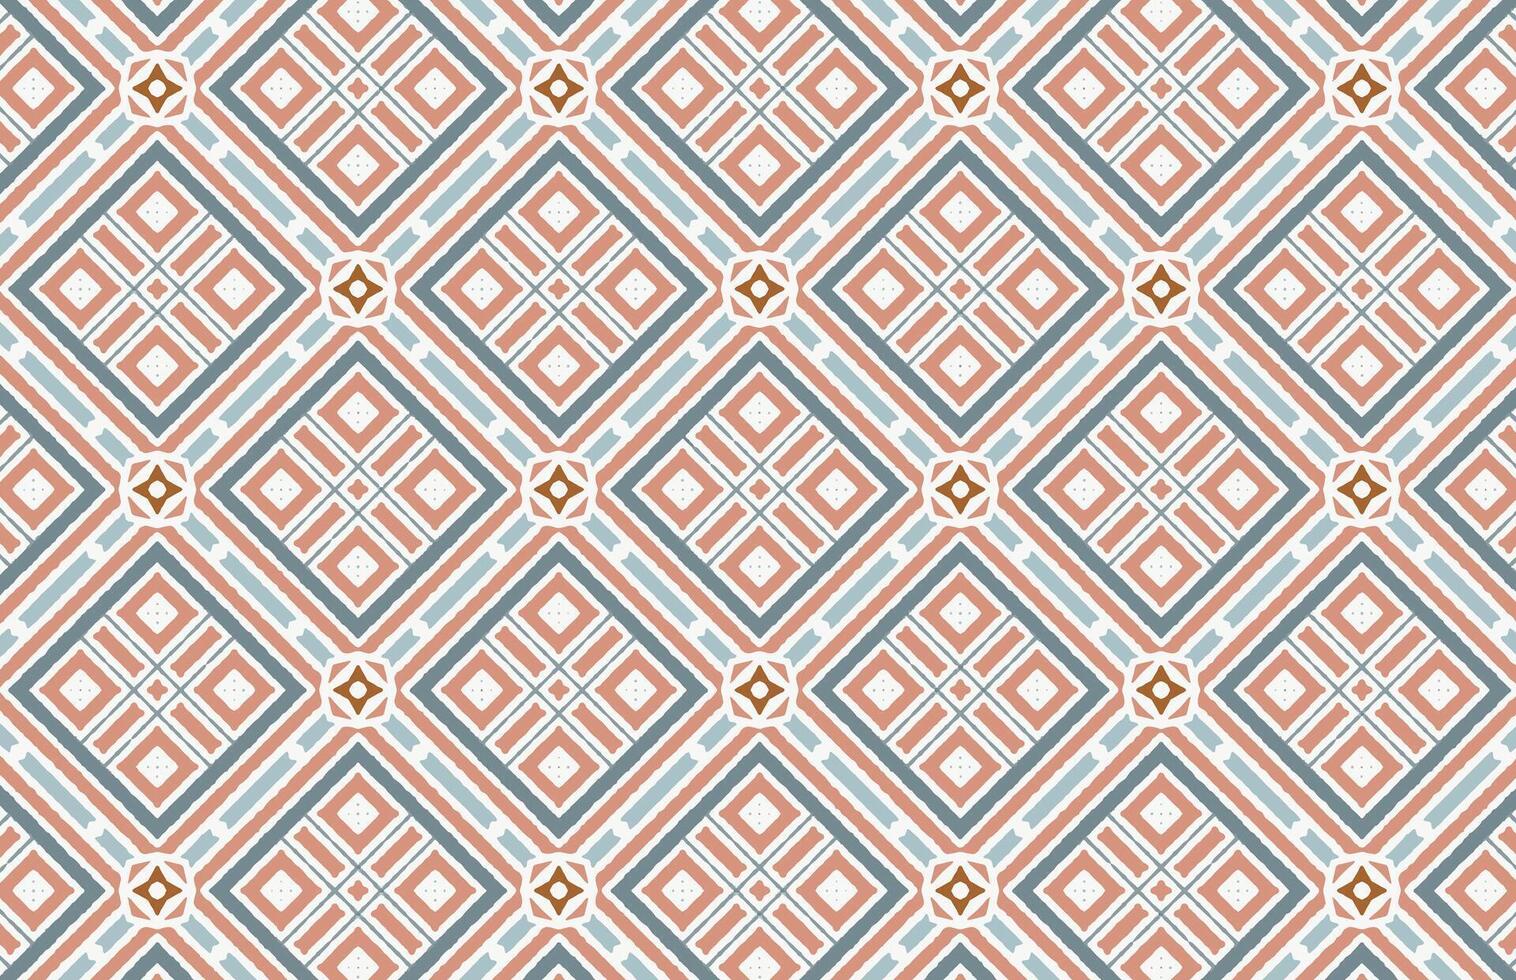 Ethnic tribal colorful square pattern vector